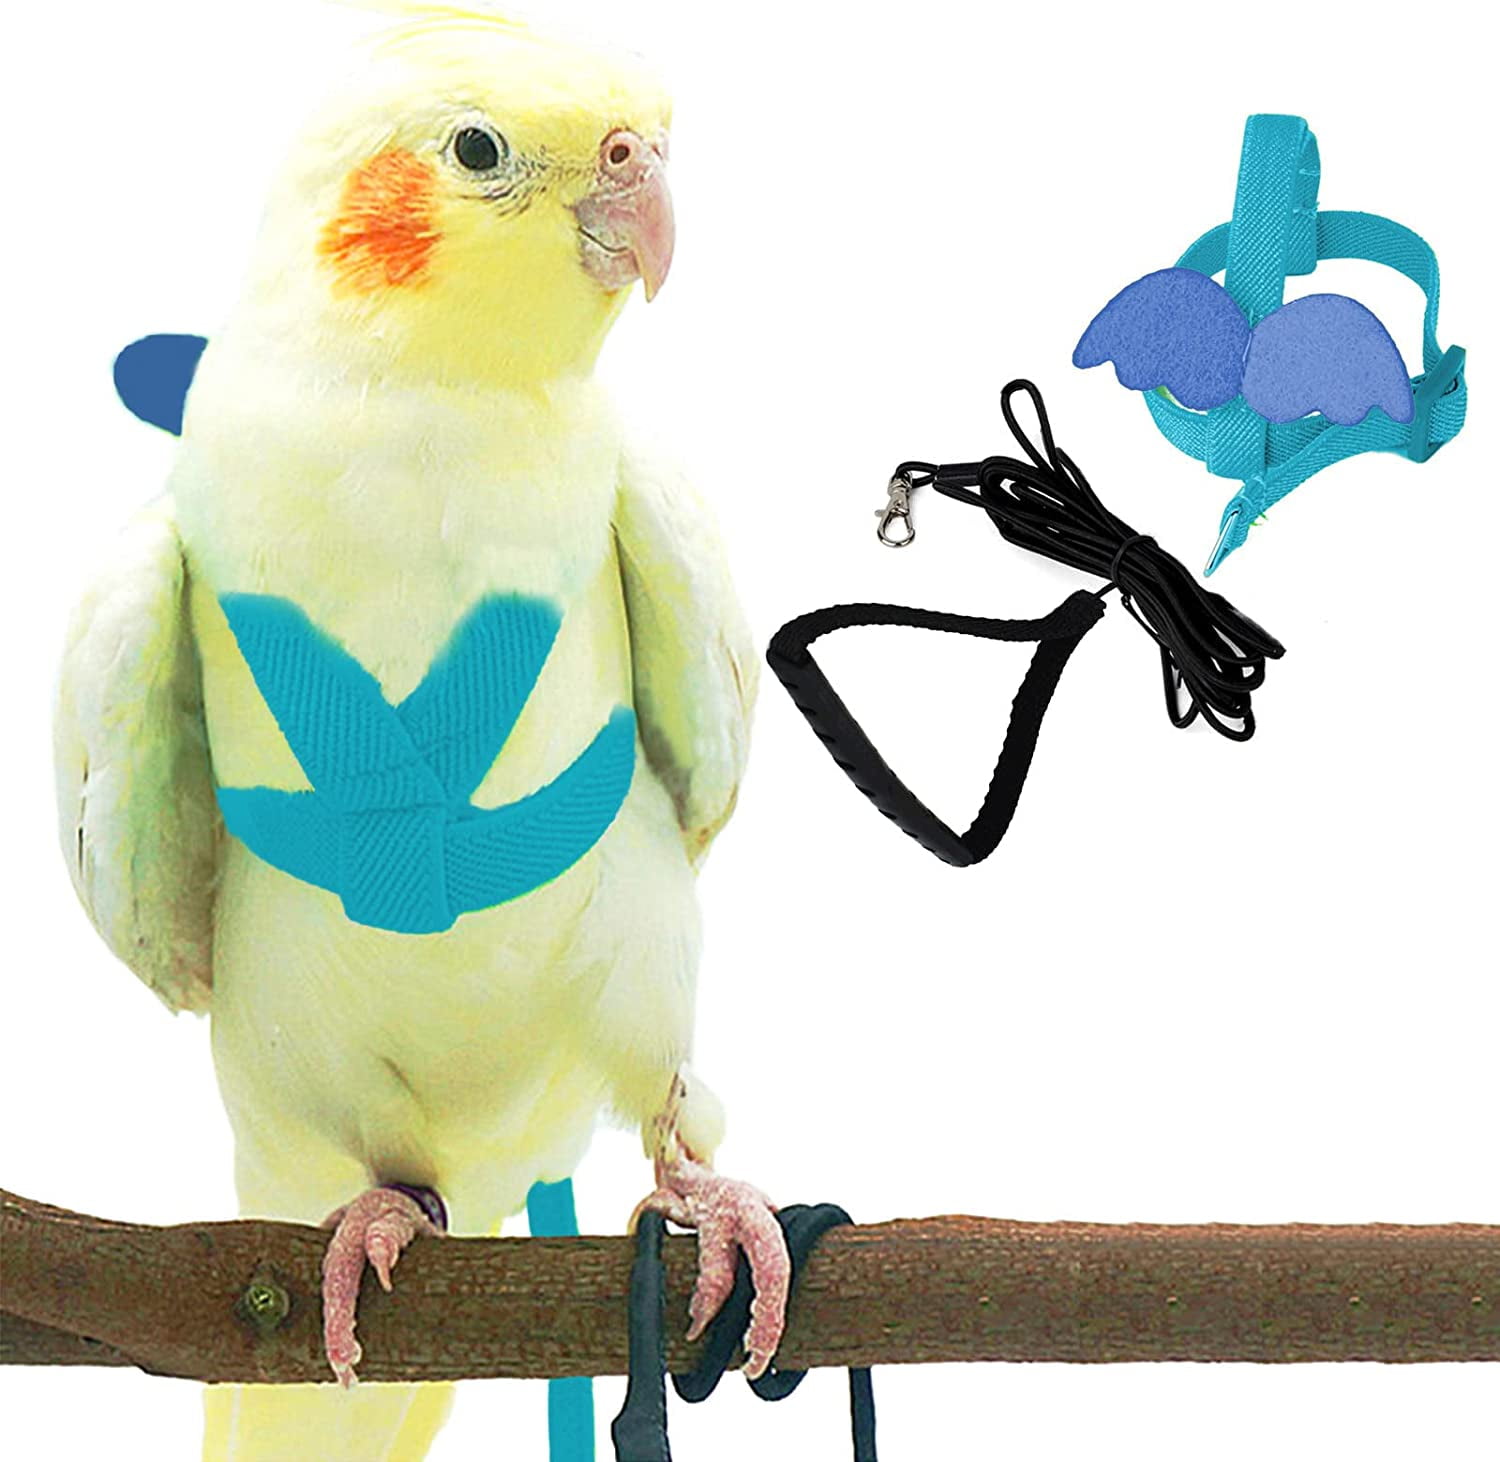 S, Blue Parrot Flight Suit with Leash for Parakeets Cockatiels Conures Budgies Bird Flight Harness Vest Bird Flying Clothes with Rope and Handle for Outdoor Activities Training 